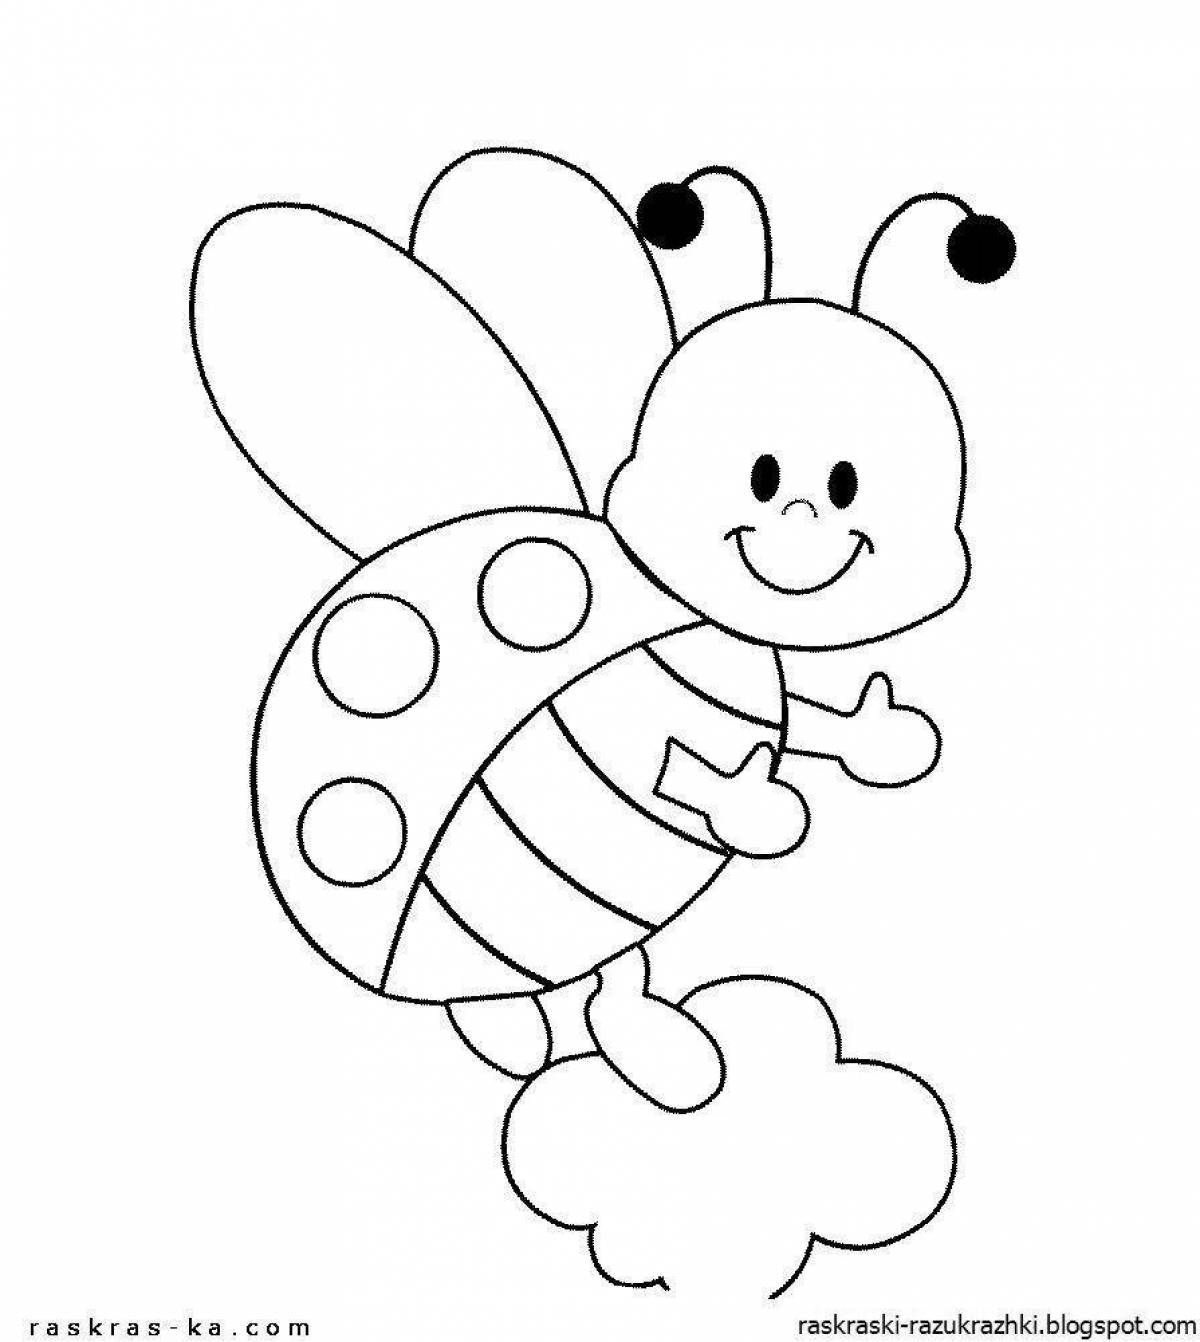 Crazy coloring page template for 2 year olds